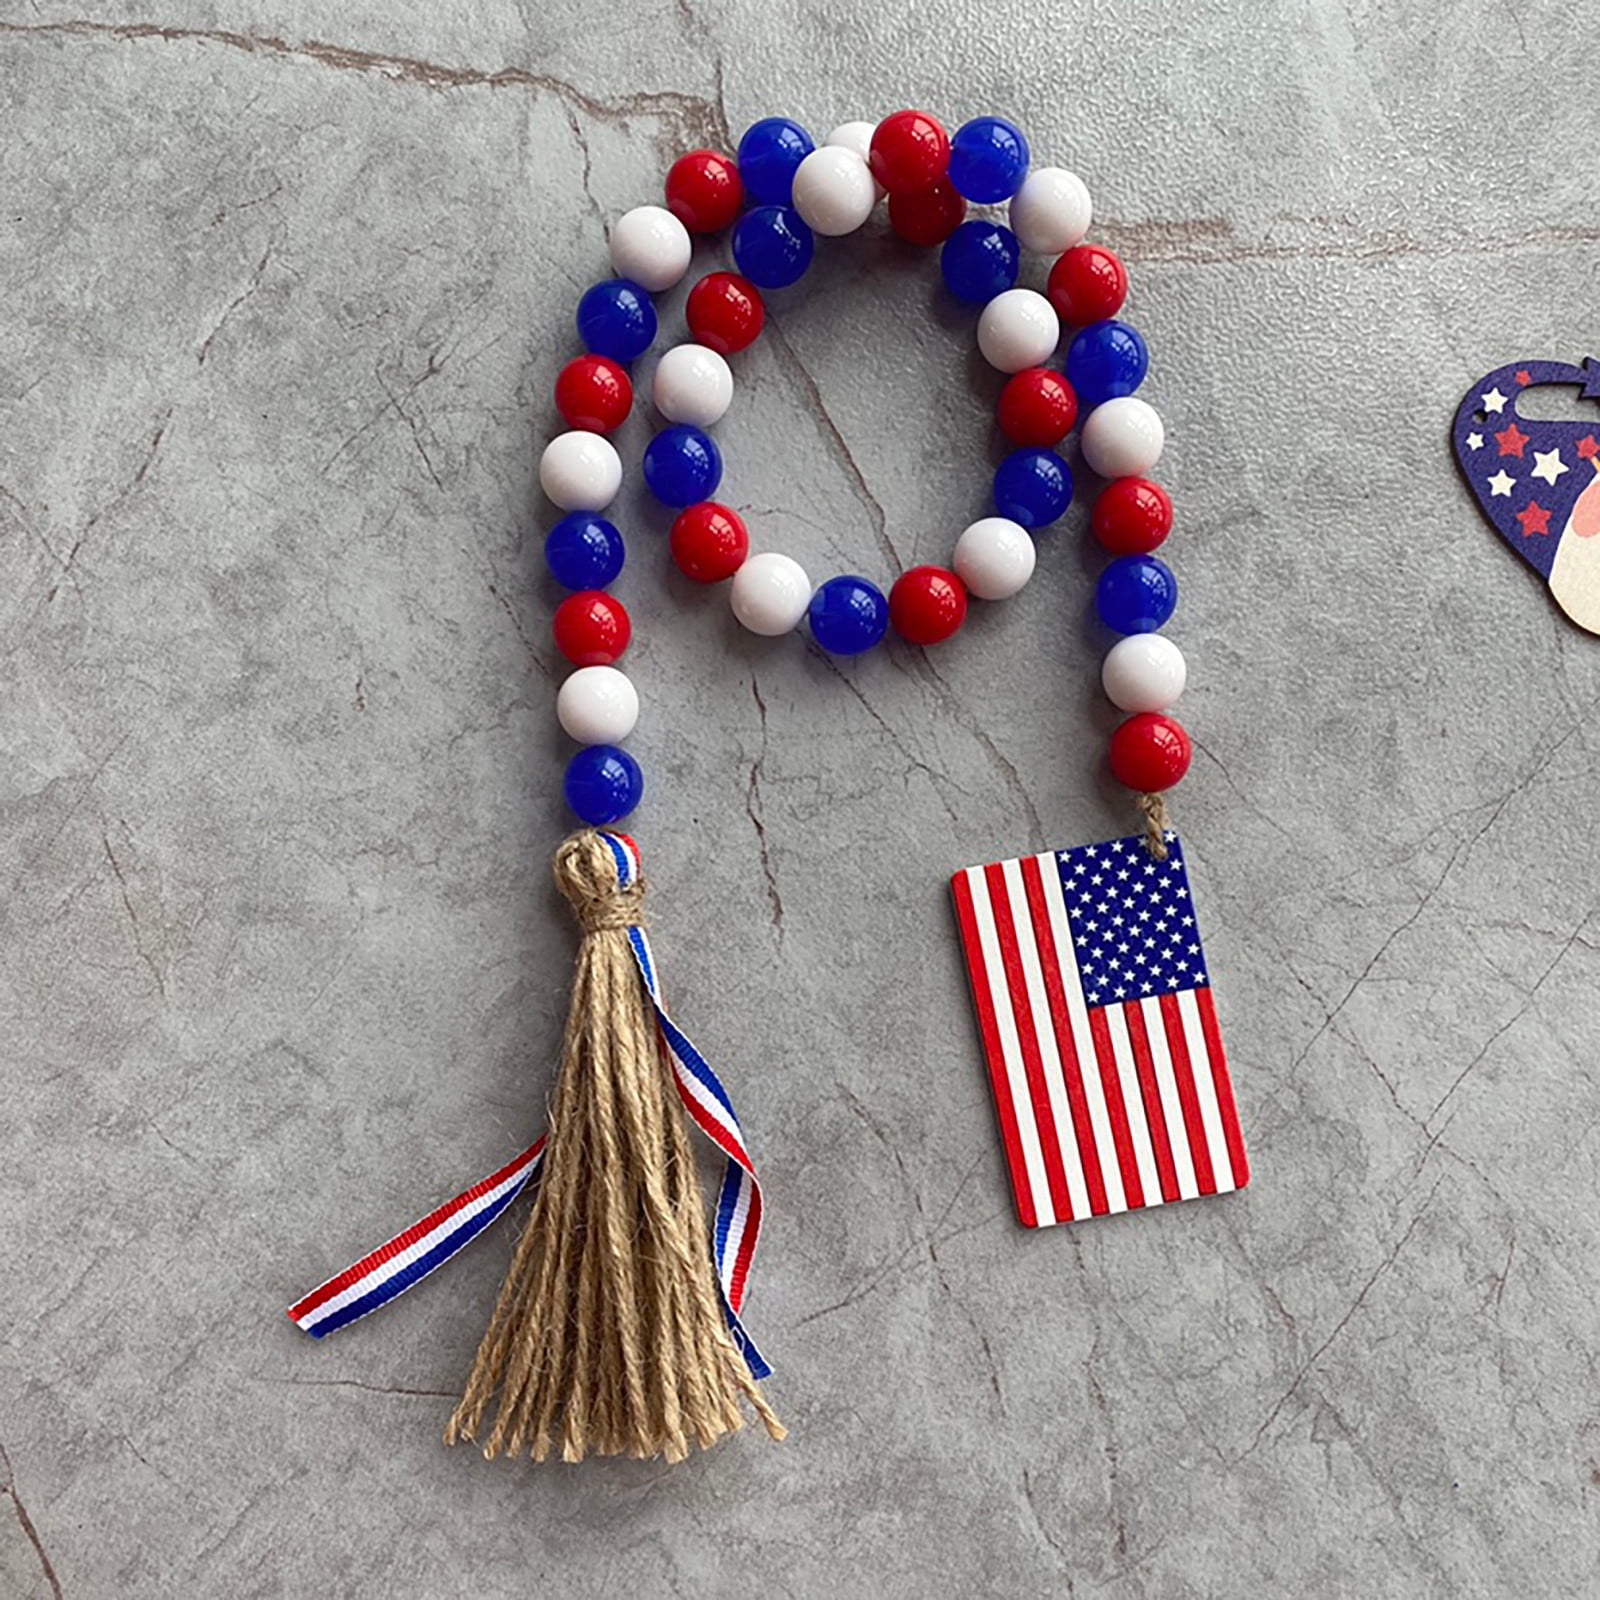 Details about   Colored Wooden Beads Tassel String Garland Pendant Independence Day Home Decor 